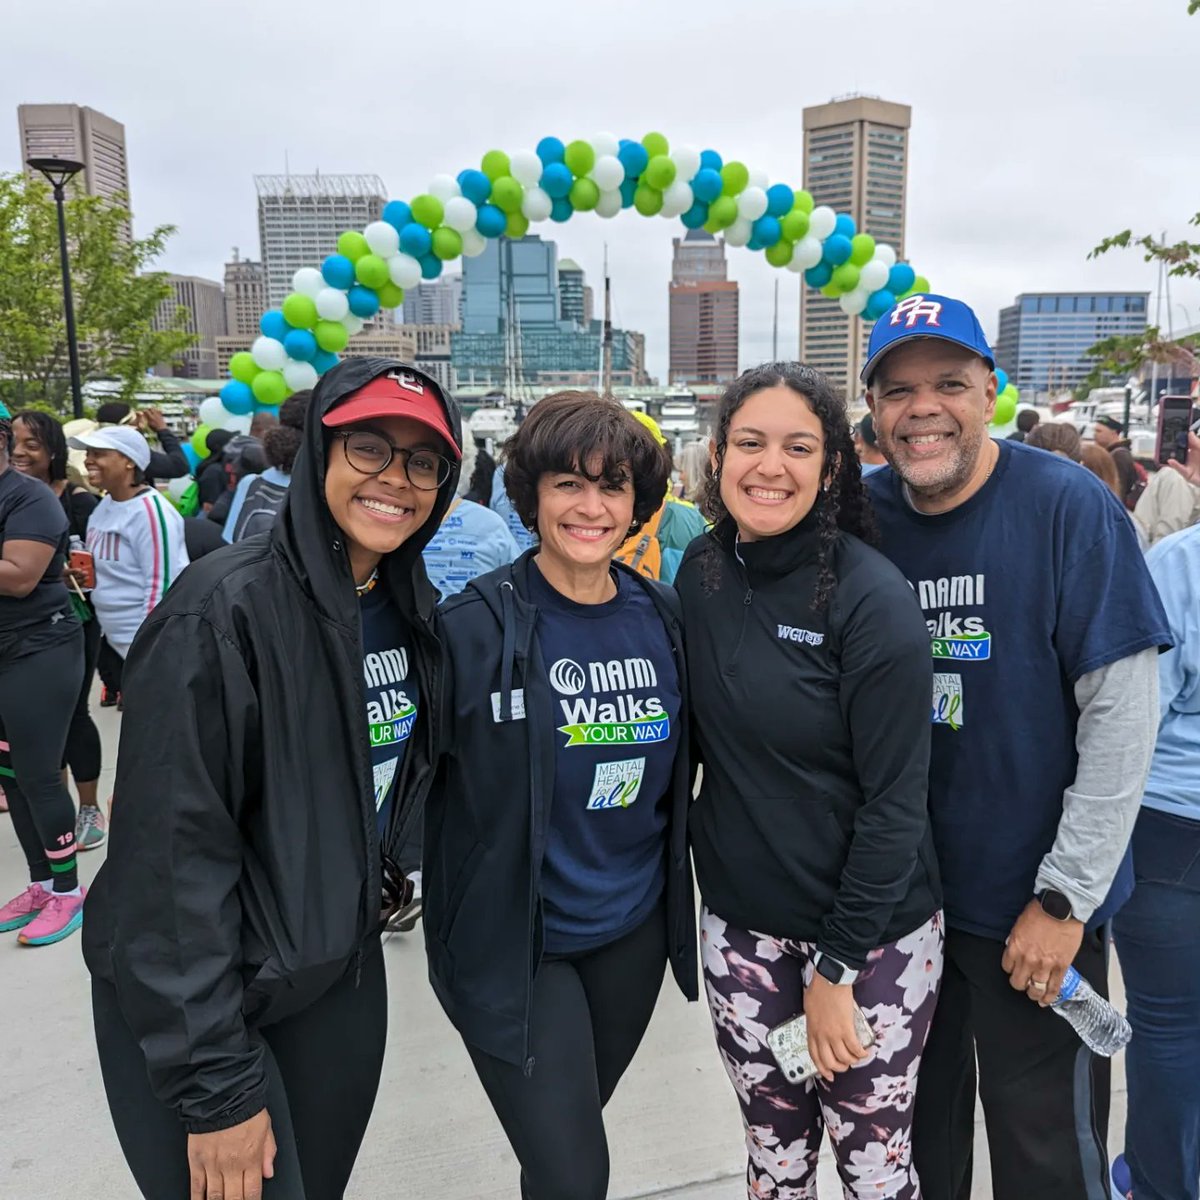 So excited #NAMIWalks #Maryland happened in person today!!! Thrilled the whole family could make it. And we reached our goal ($250K) but there is still time to go over the goal in the coming weeks. Link in comments. #Together4MH